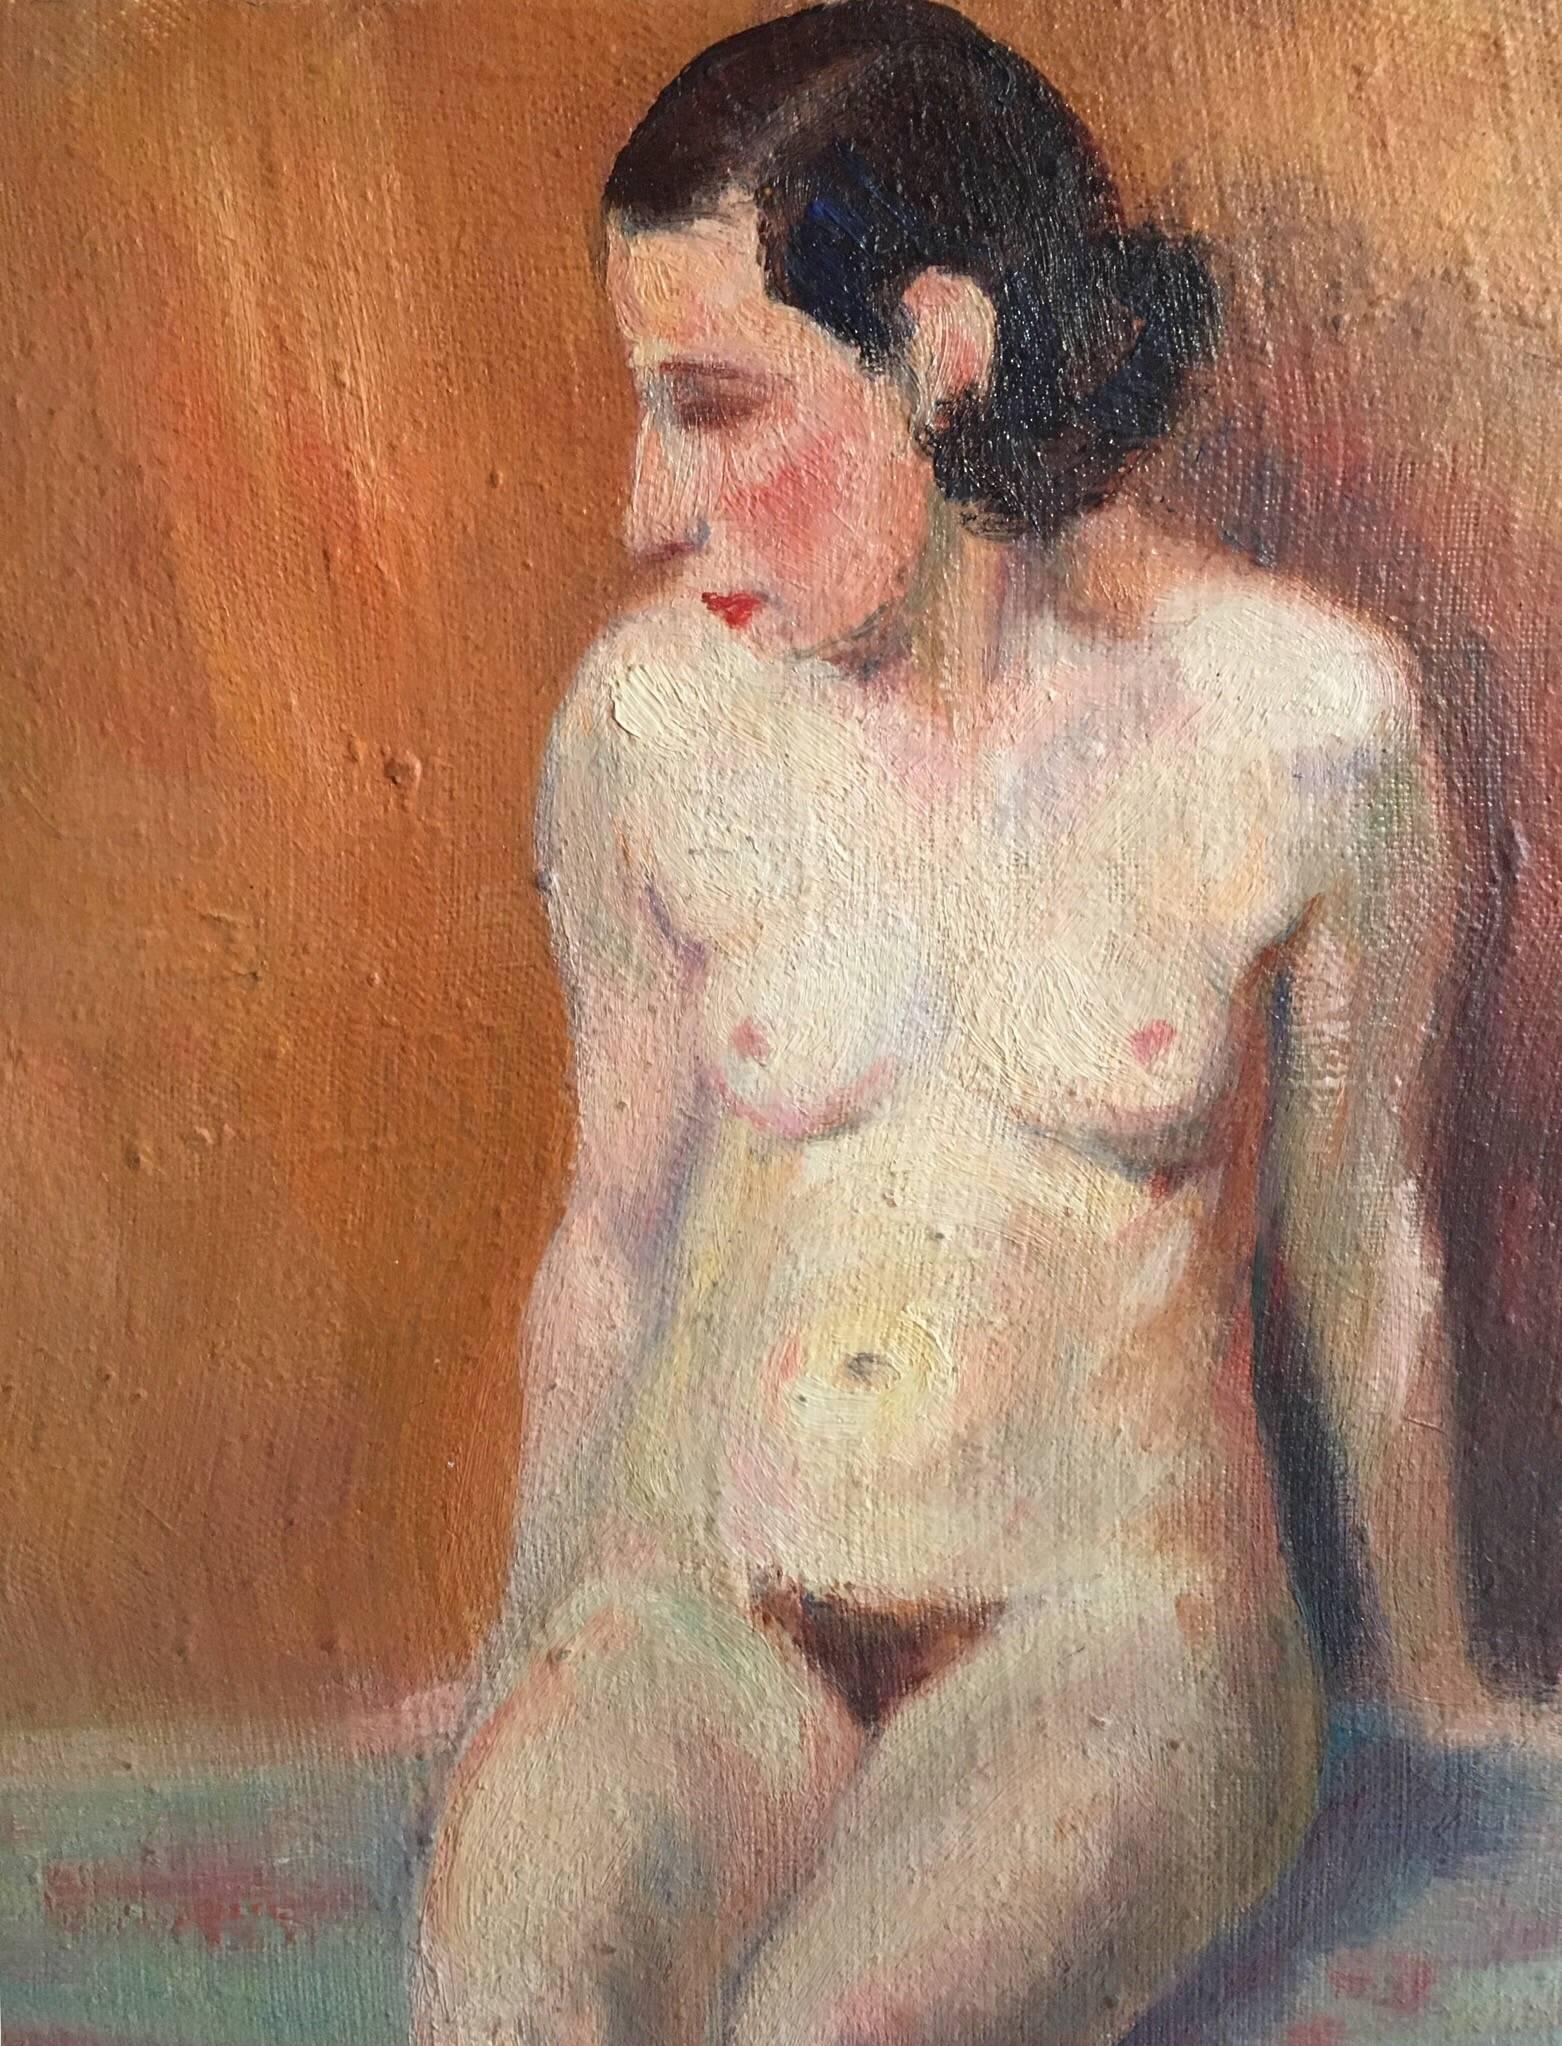 The Seated Nude
French School, Early 20th Century
Oil painting on canvas, unframed
Canvas size: 15.75 x 13 inches

This captivating nude shows the artists model sat up, head turned to the side to show off her fashionable hairstyle. The backdrop